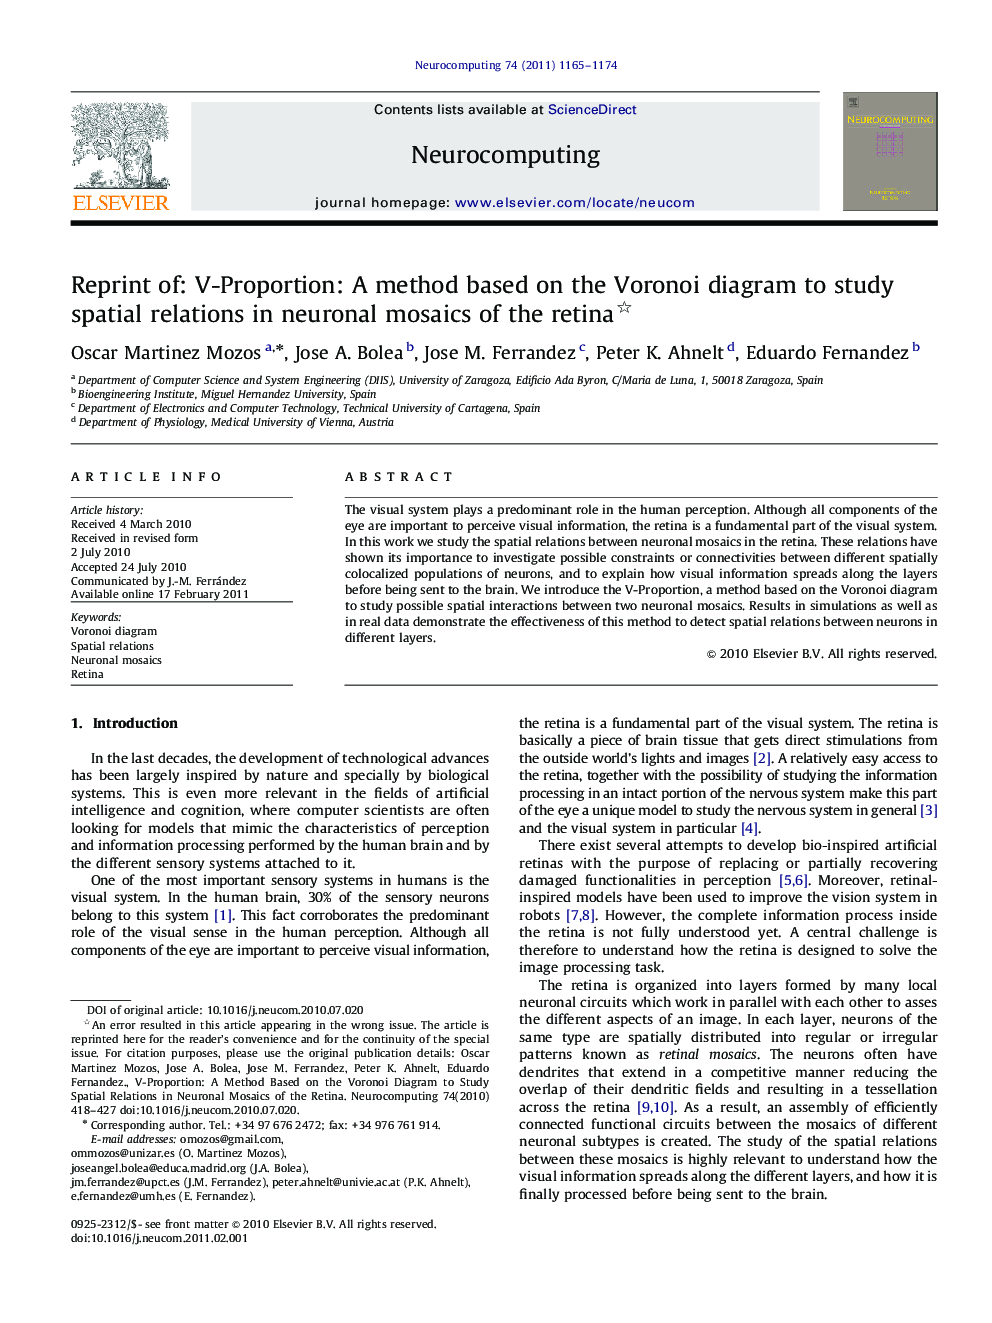 Reprint of: V-Proportion: A method based on the Voronoi diagram to study spatial relations in neuronal mosaics of the retina 